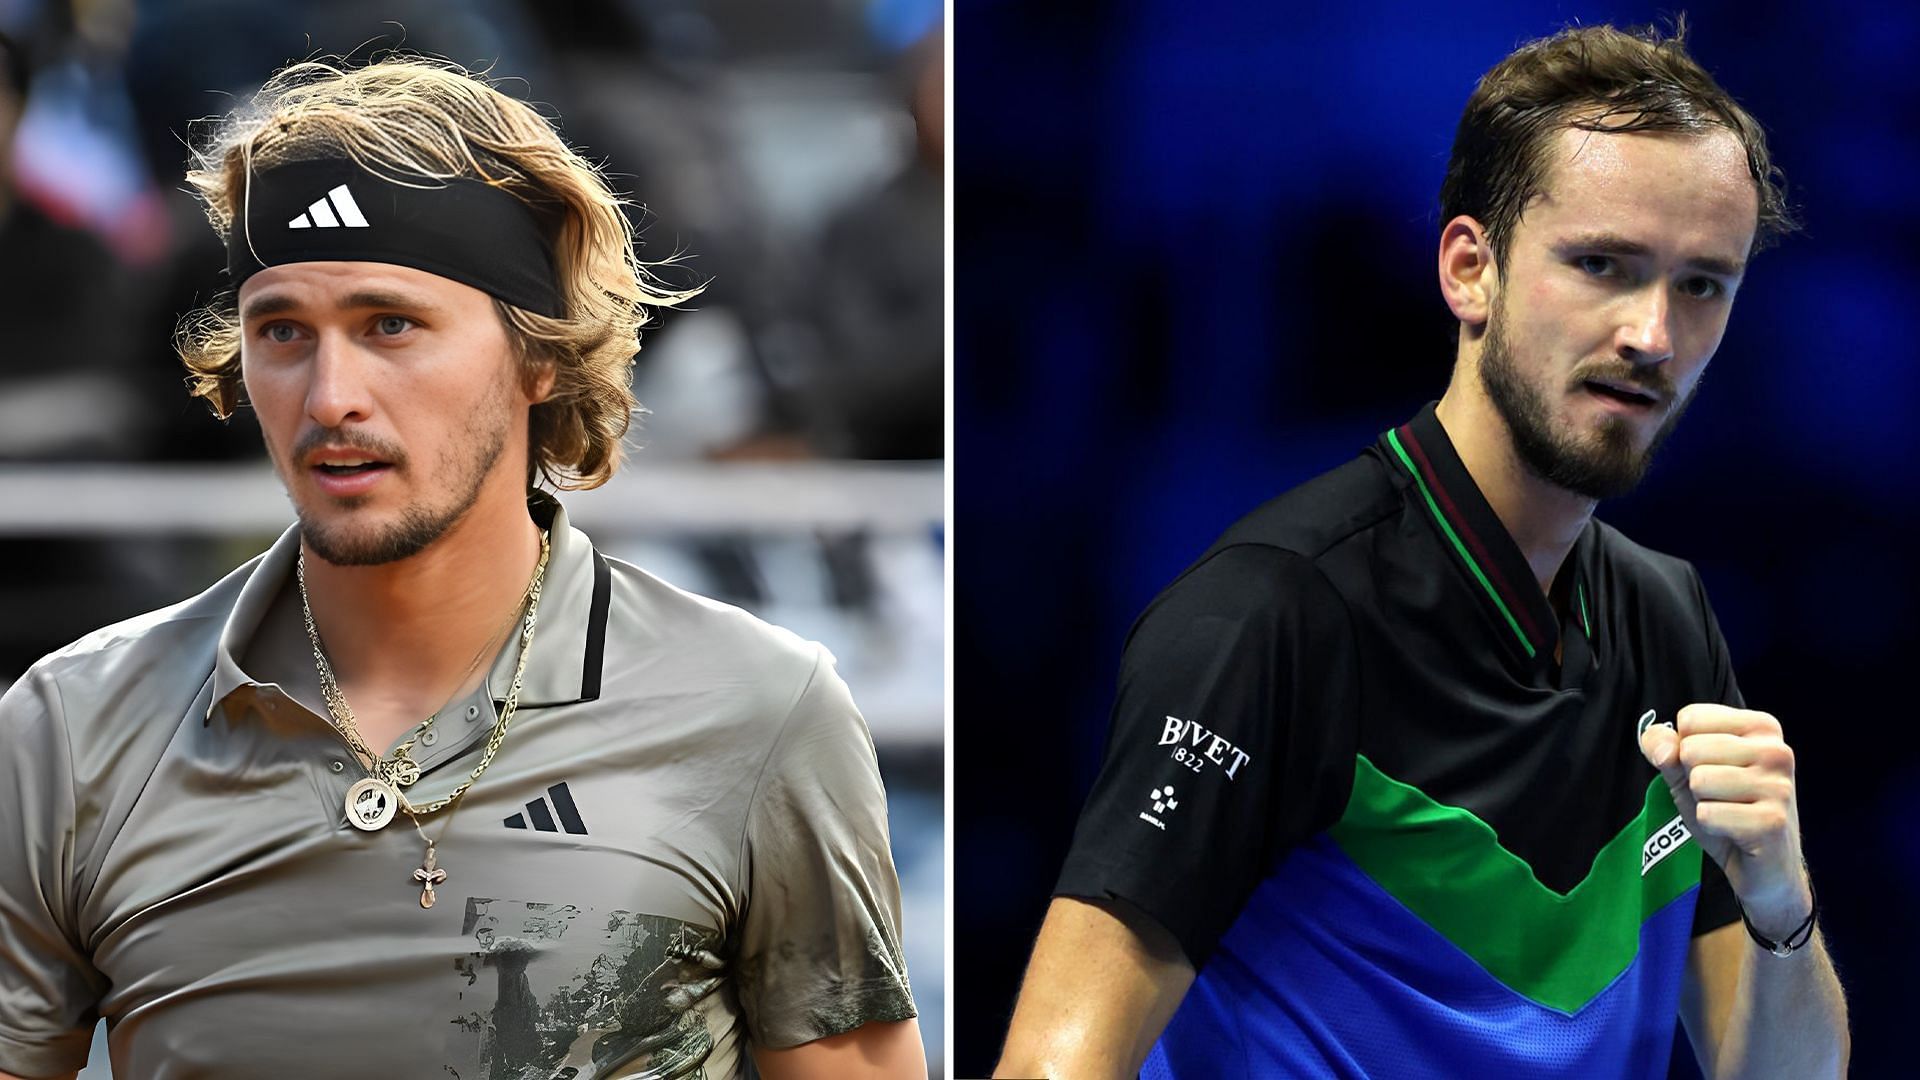 Alexander Zverev and Daniil Medvedev will be in action at their respective tournaments on Tuesday.